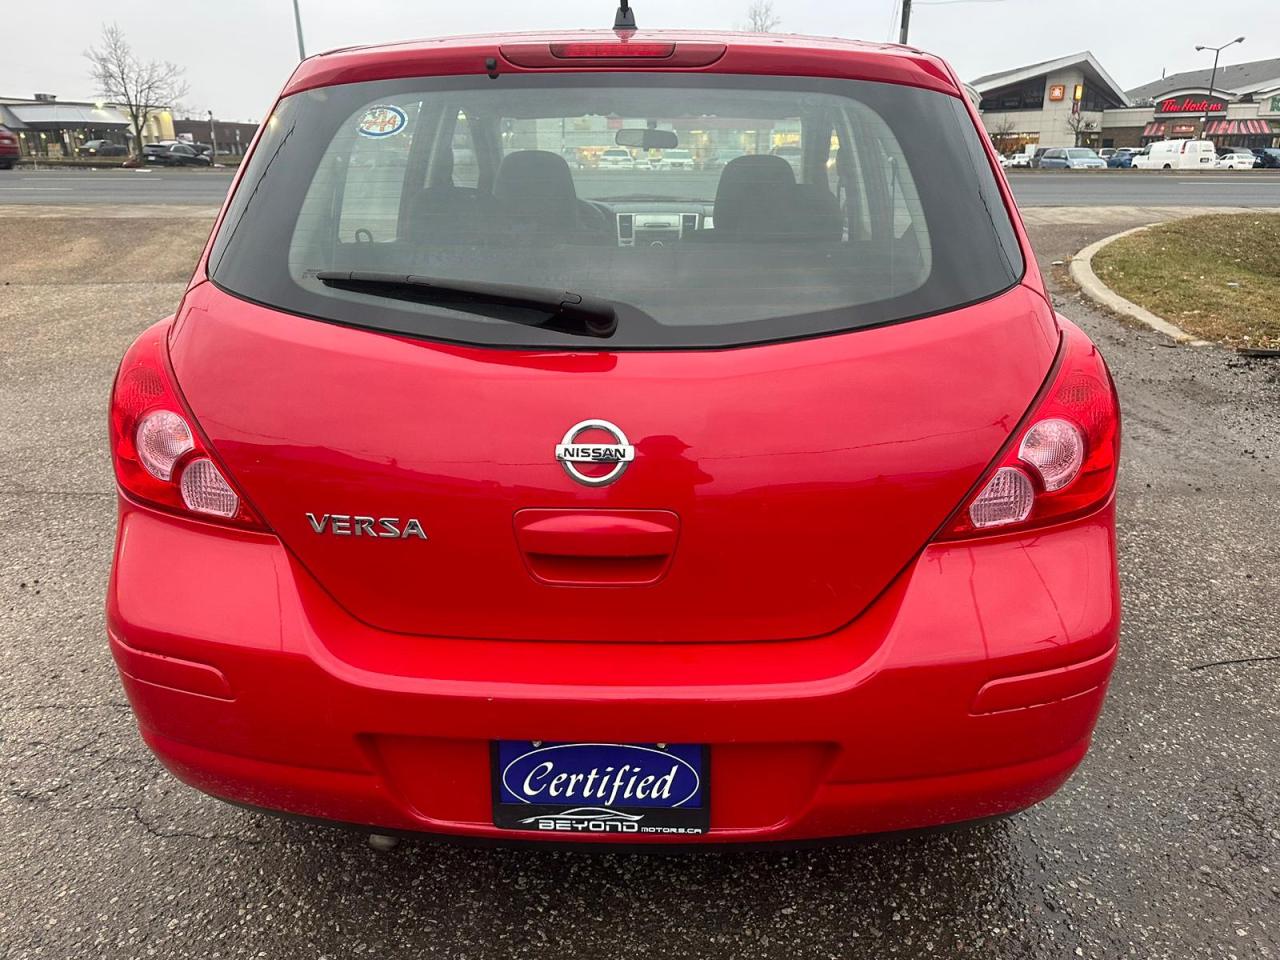 2007 Nissan Versa S CERTIFIED WITH 3 YEARS WARRANTY INCLUDED - Photo #10